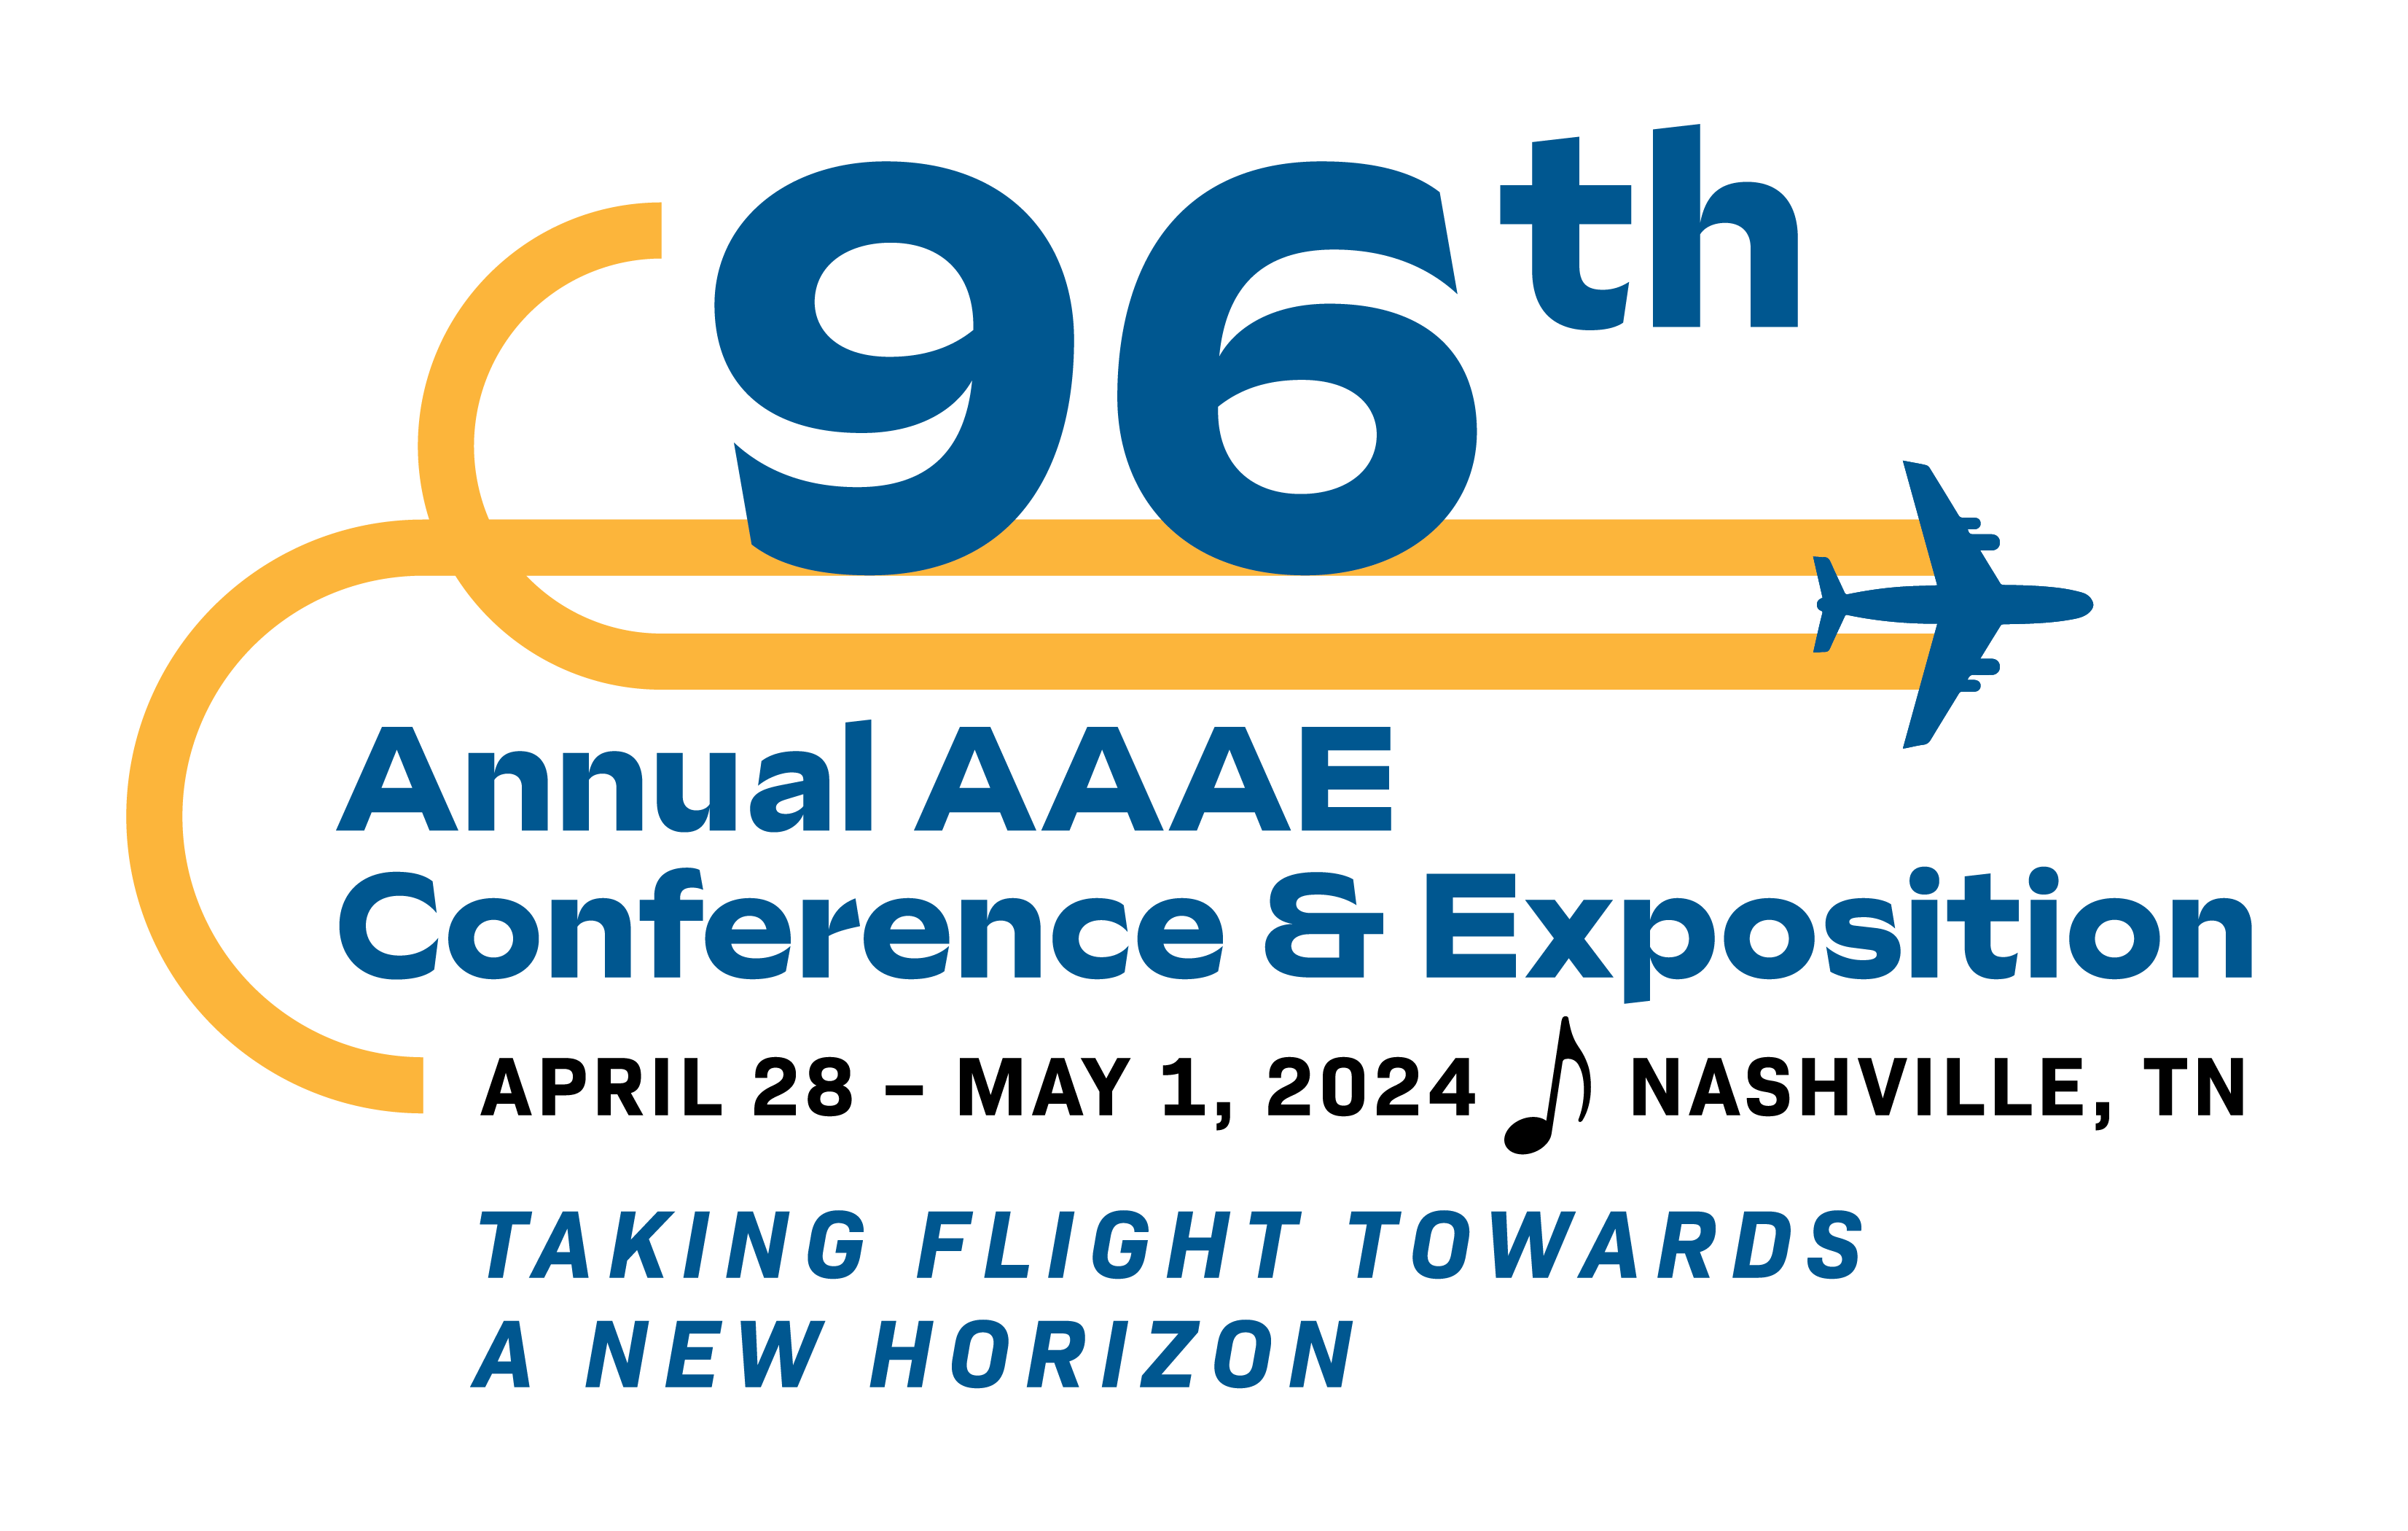 96th Annual AAAE Conference & Exposition